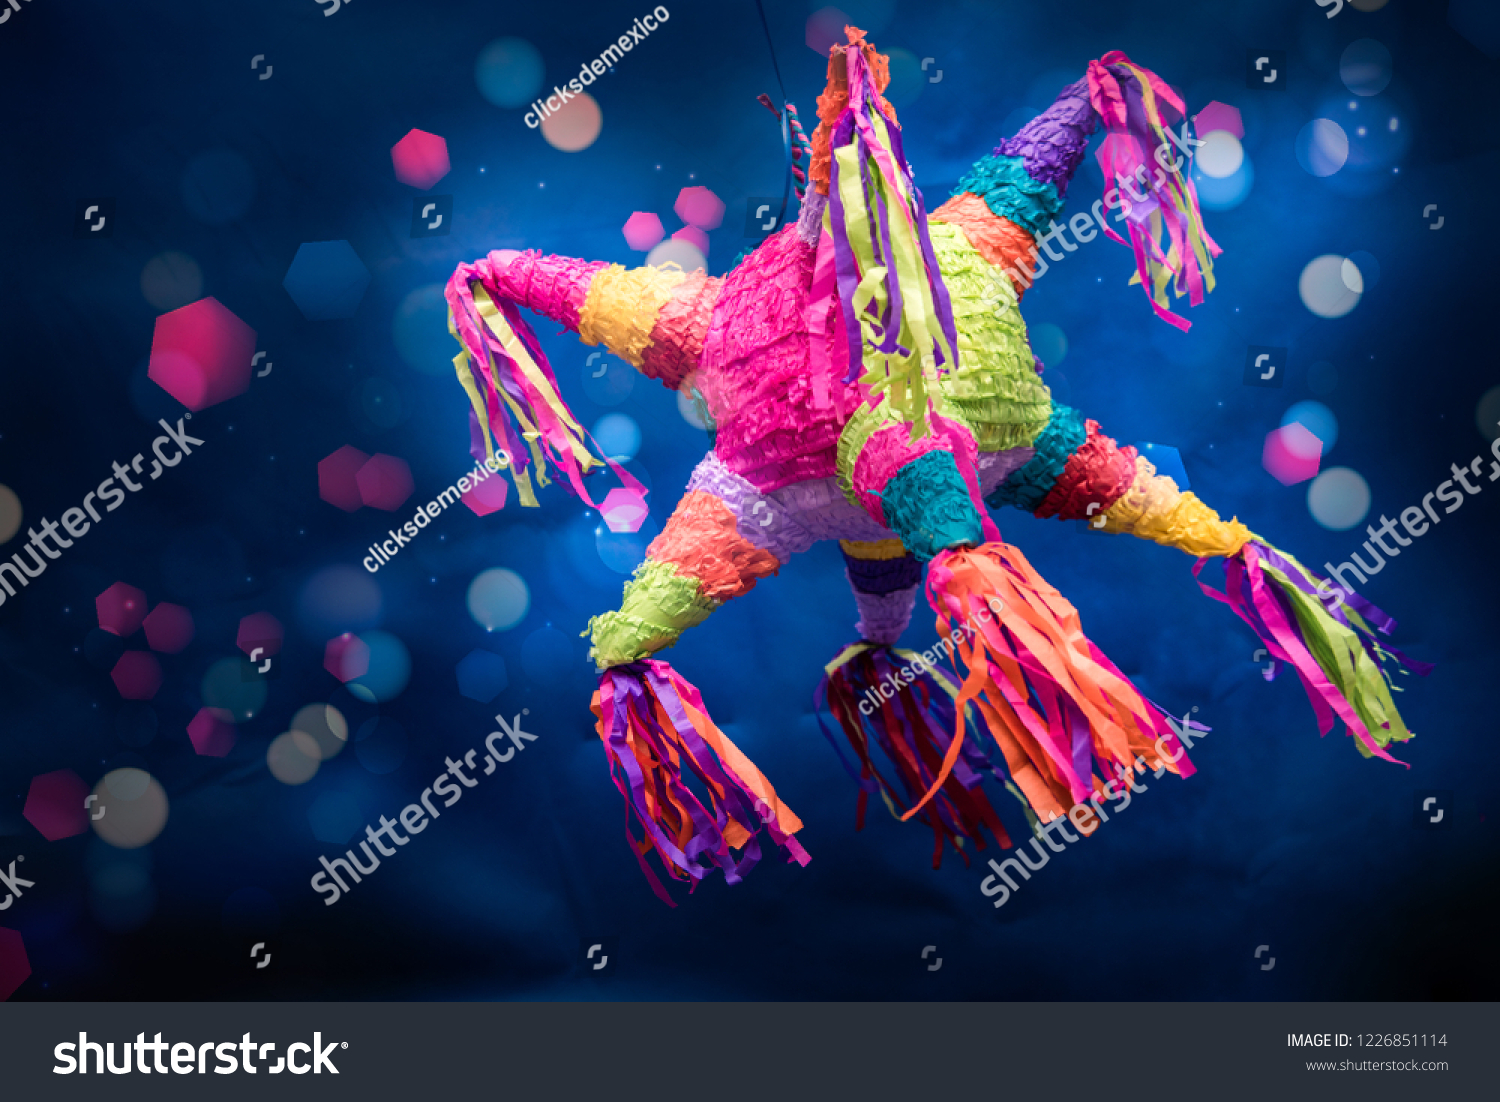 mexican piñata party hanging on blue and green background with multi-colored glitters celebrating birthday, christmas, party, party songs, figure in the shape of star and donkey, family fun #1226851114